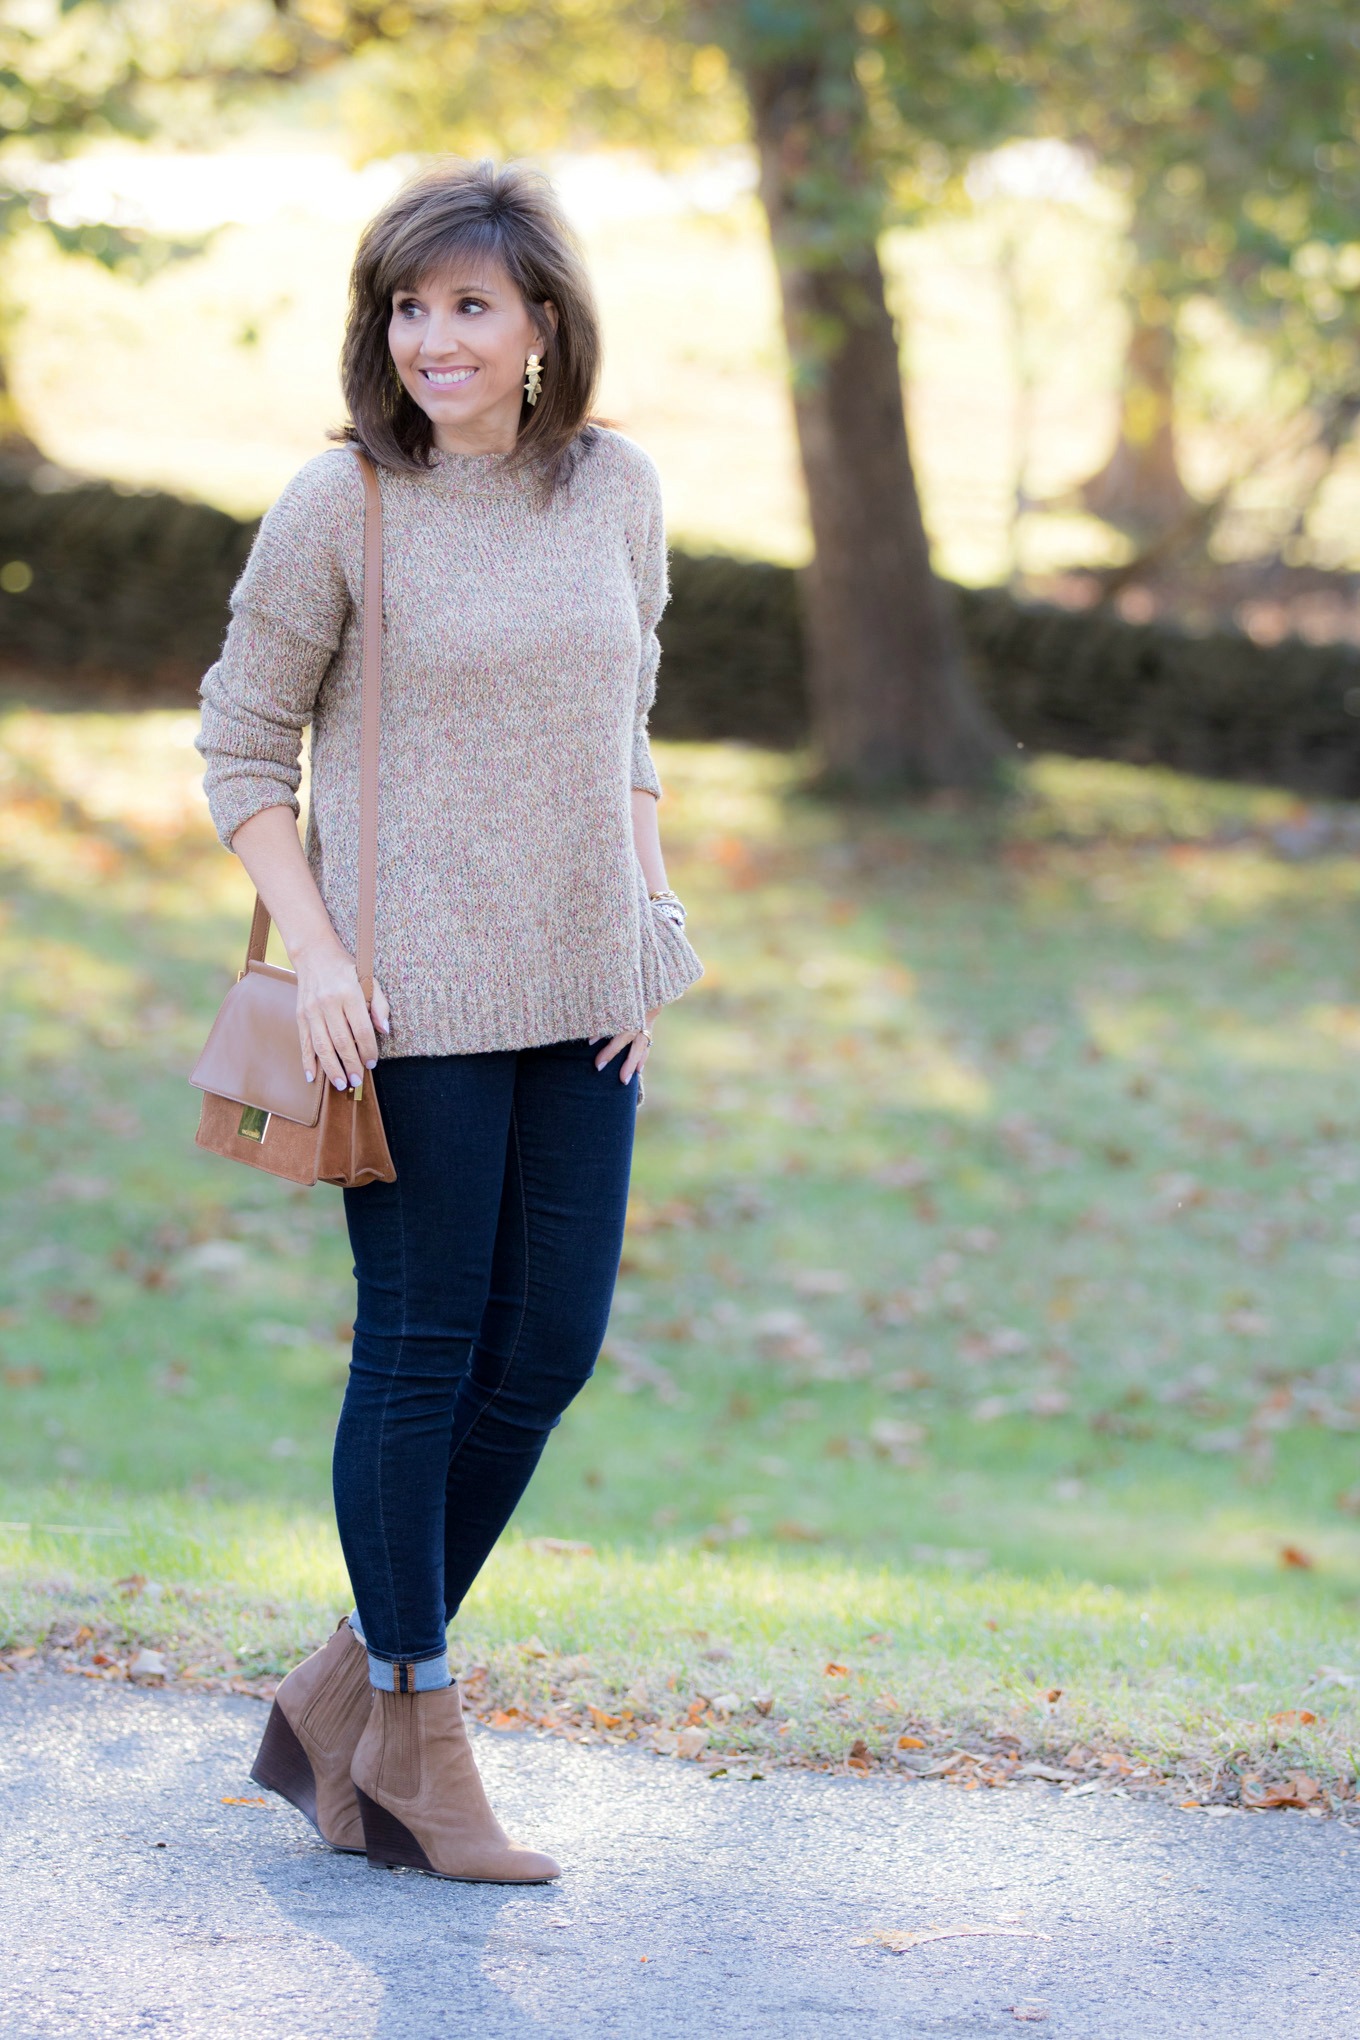 Fashion blogger Cyndi Spivey styling a casual fall outfit from Nordstrom for women over 40.